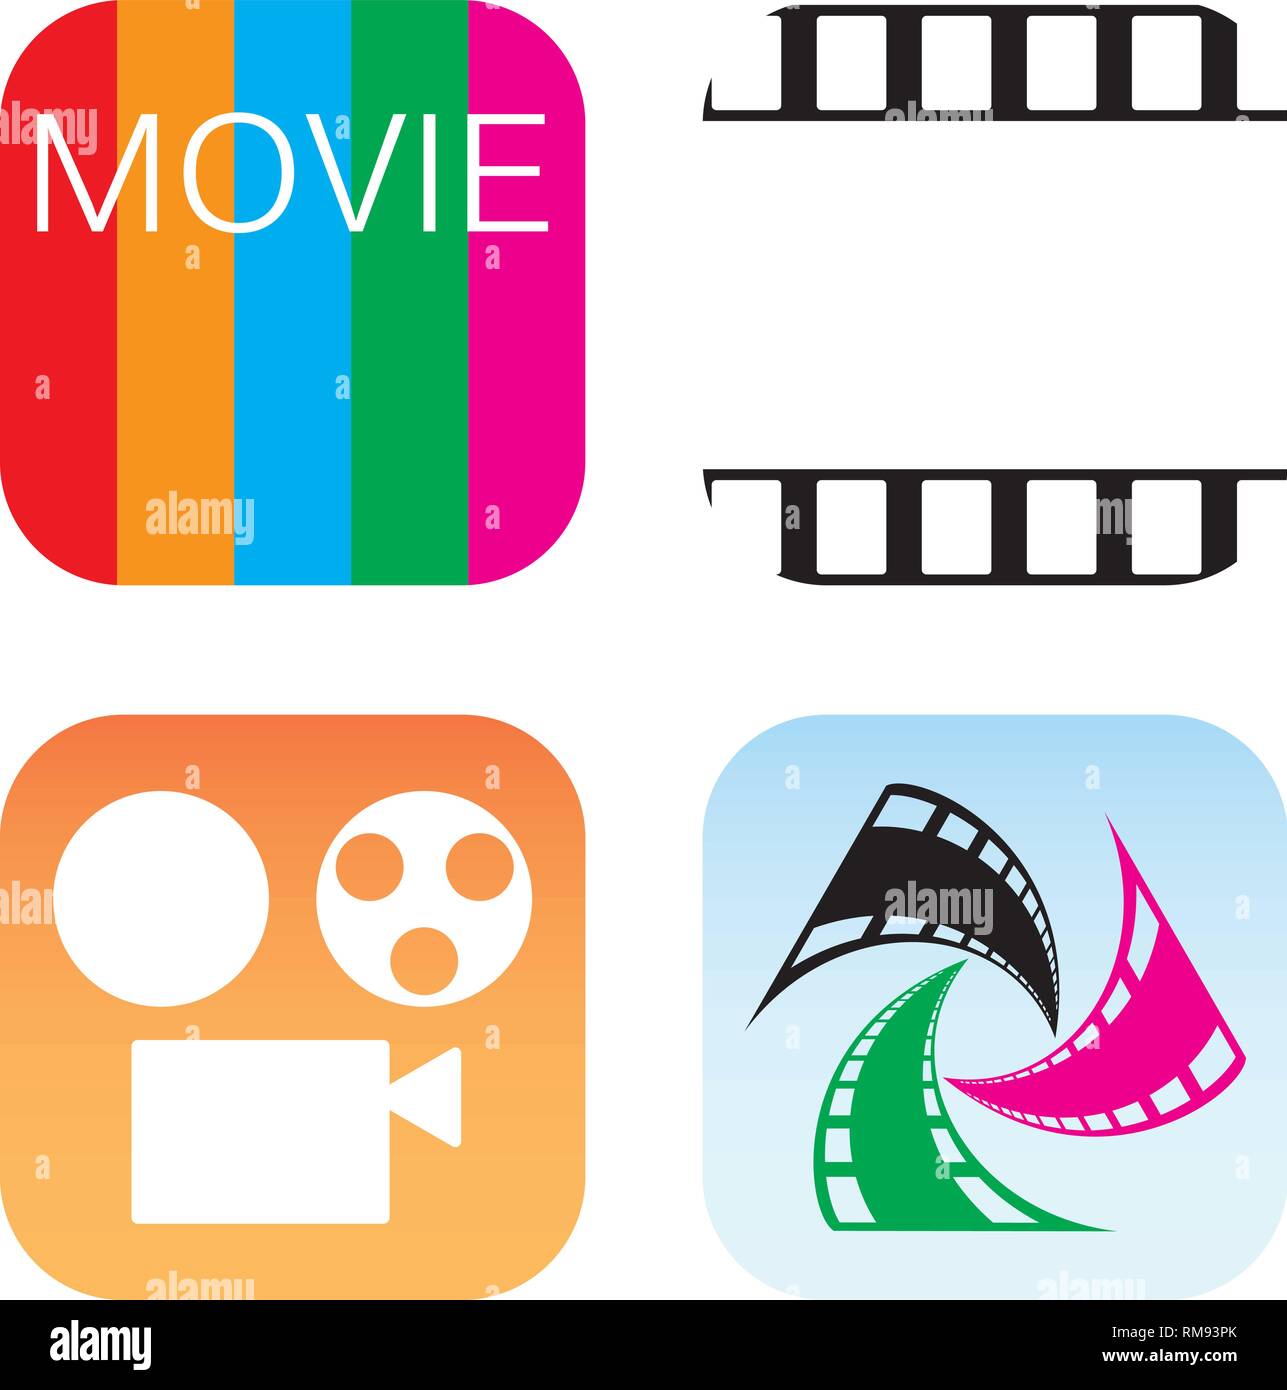 Movies and films icons with ios applications. Stock Vector